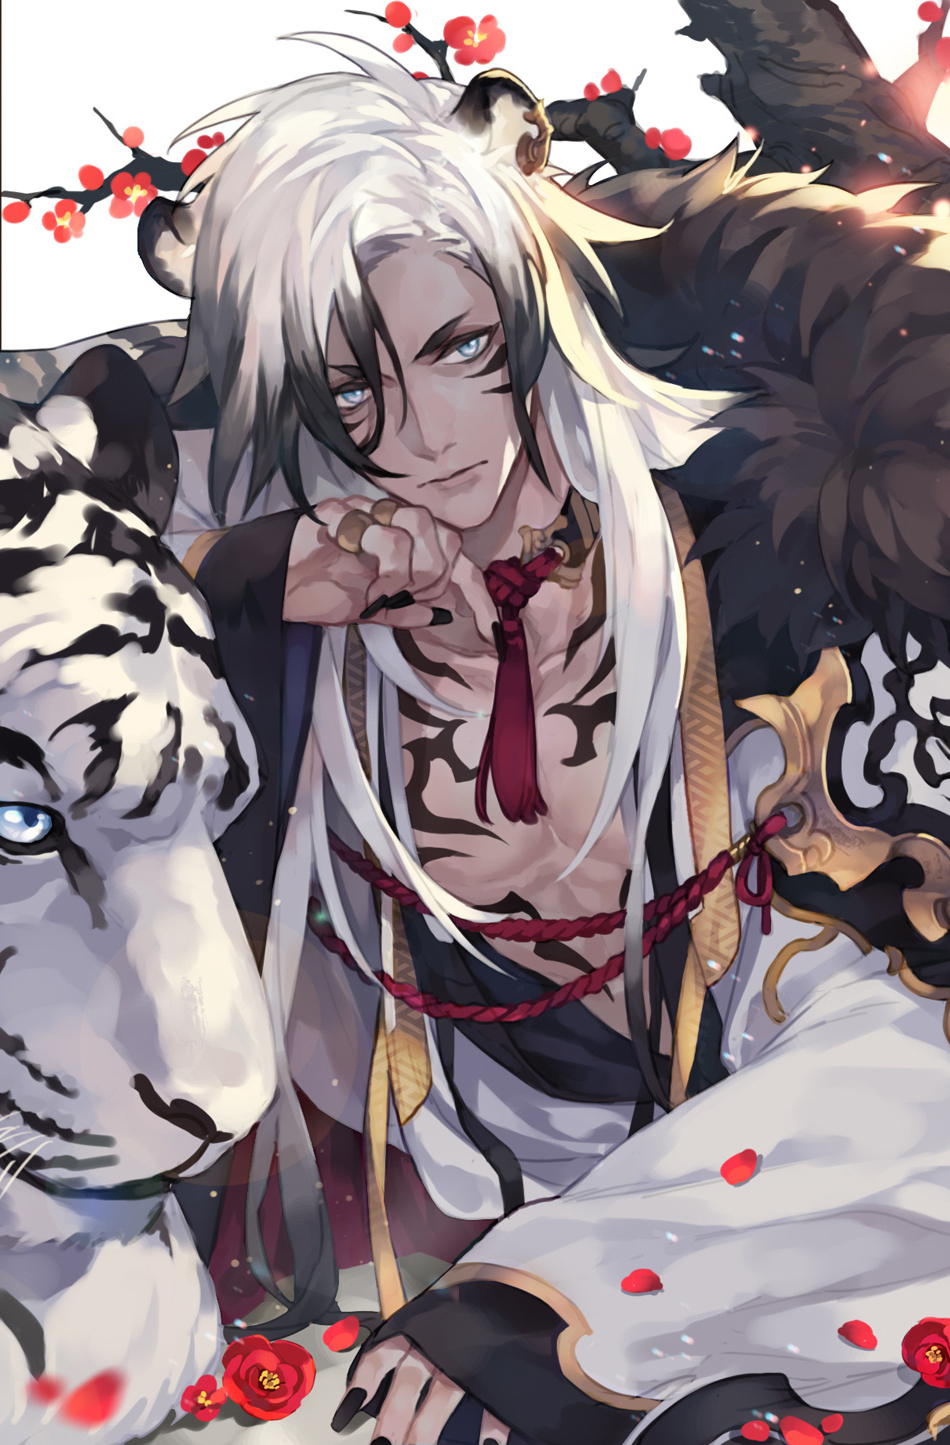 Download wallpaper 950x1534 tiger and warrior, anime boy, original, iphone,  950x1534 hd background, 8436